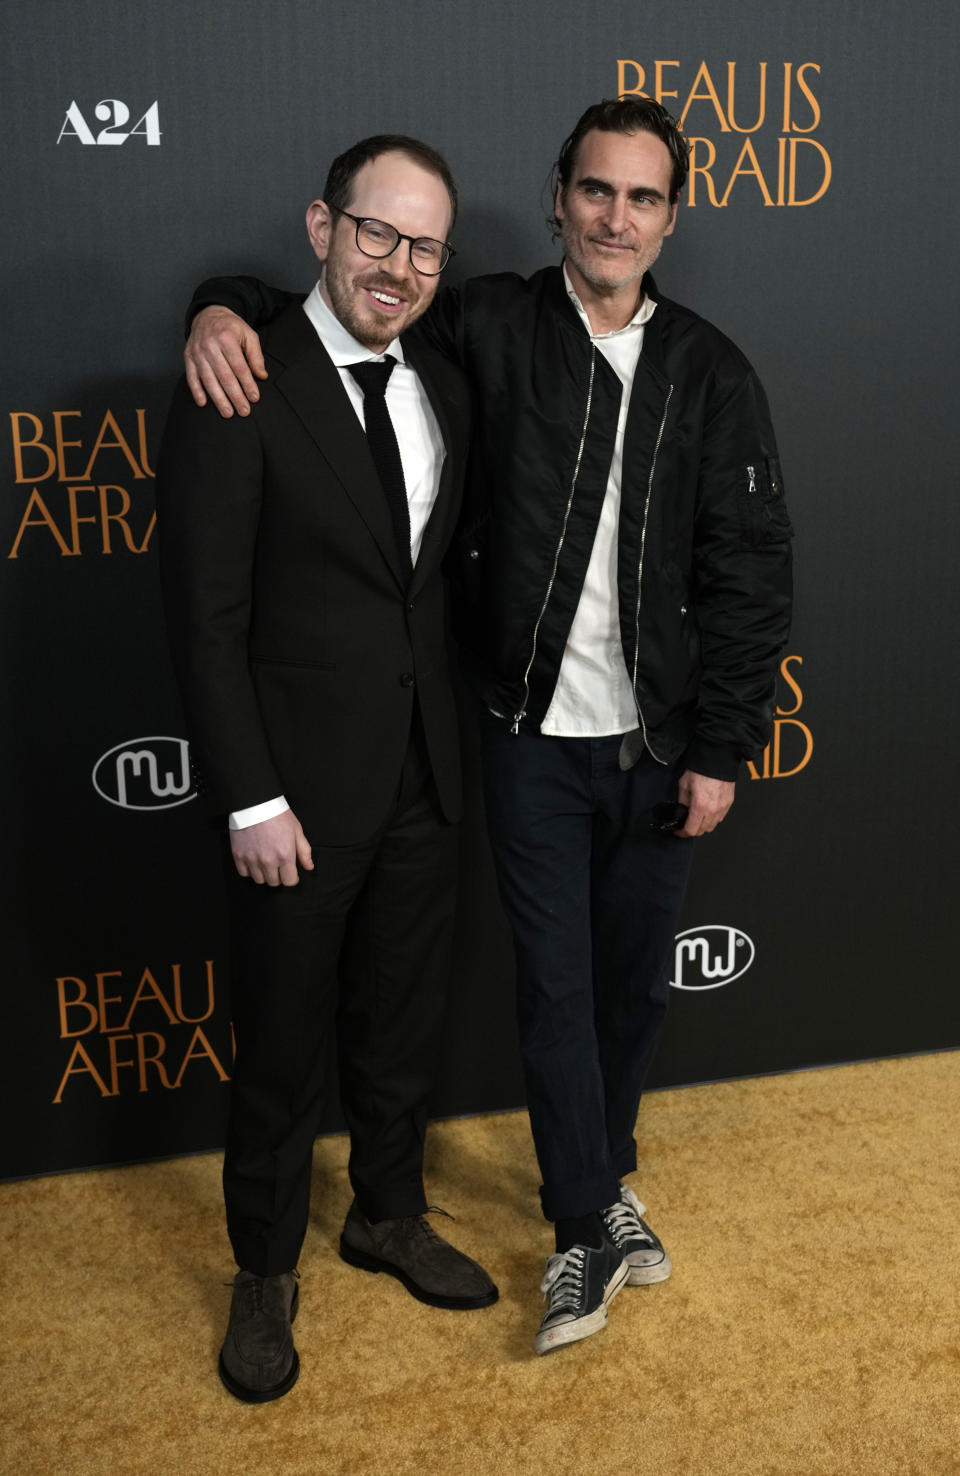 Ari Aster, left, writer/director of "Beau Is Afraid," poses with star Joaquin Phoenix at the premiere of the film, Monday, April 10, 2023, at the Directors Guild of America in Los Angeles. (AP Photo/Chris Pizzello)